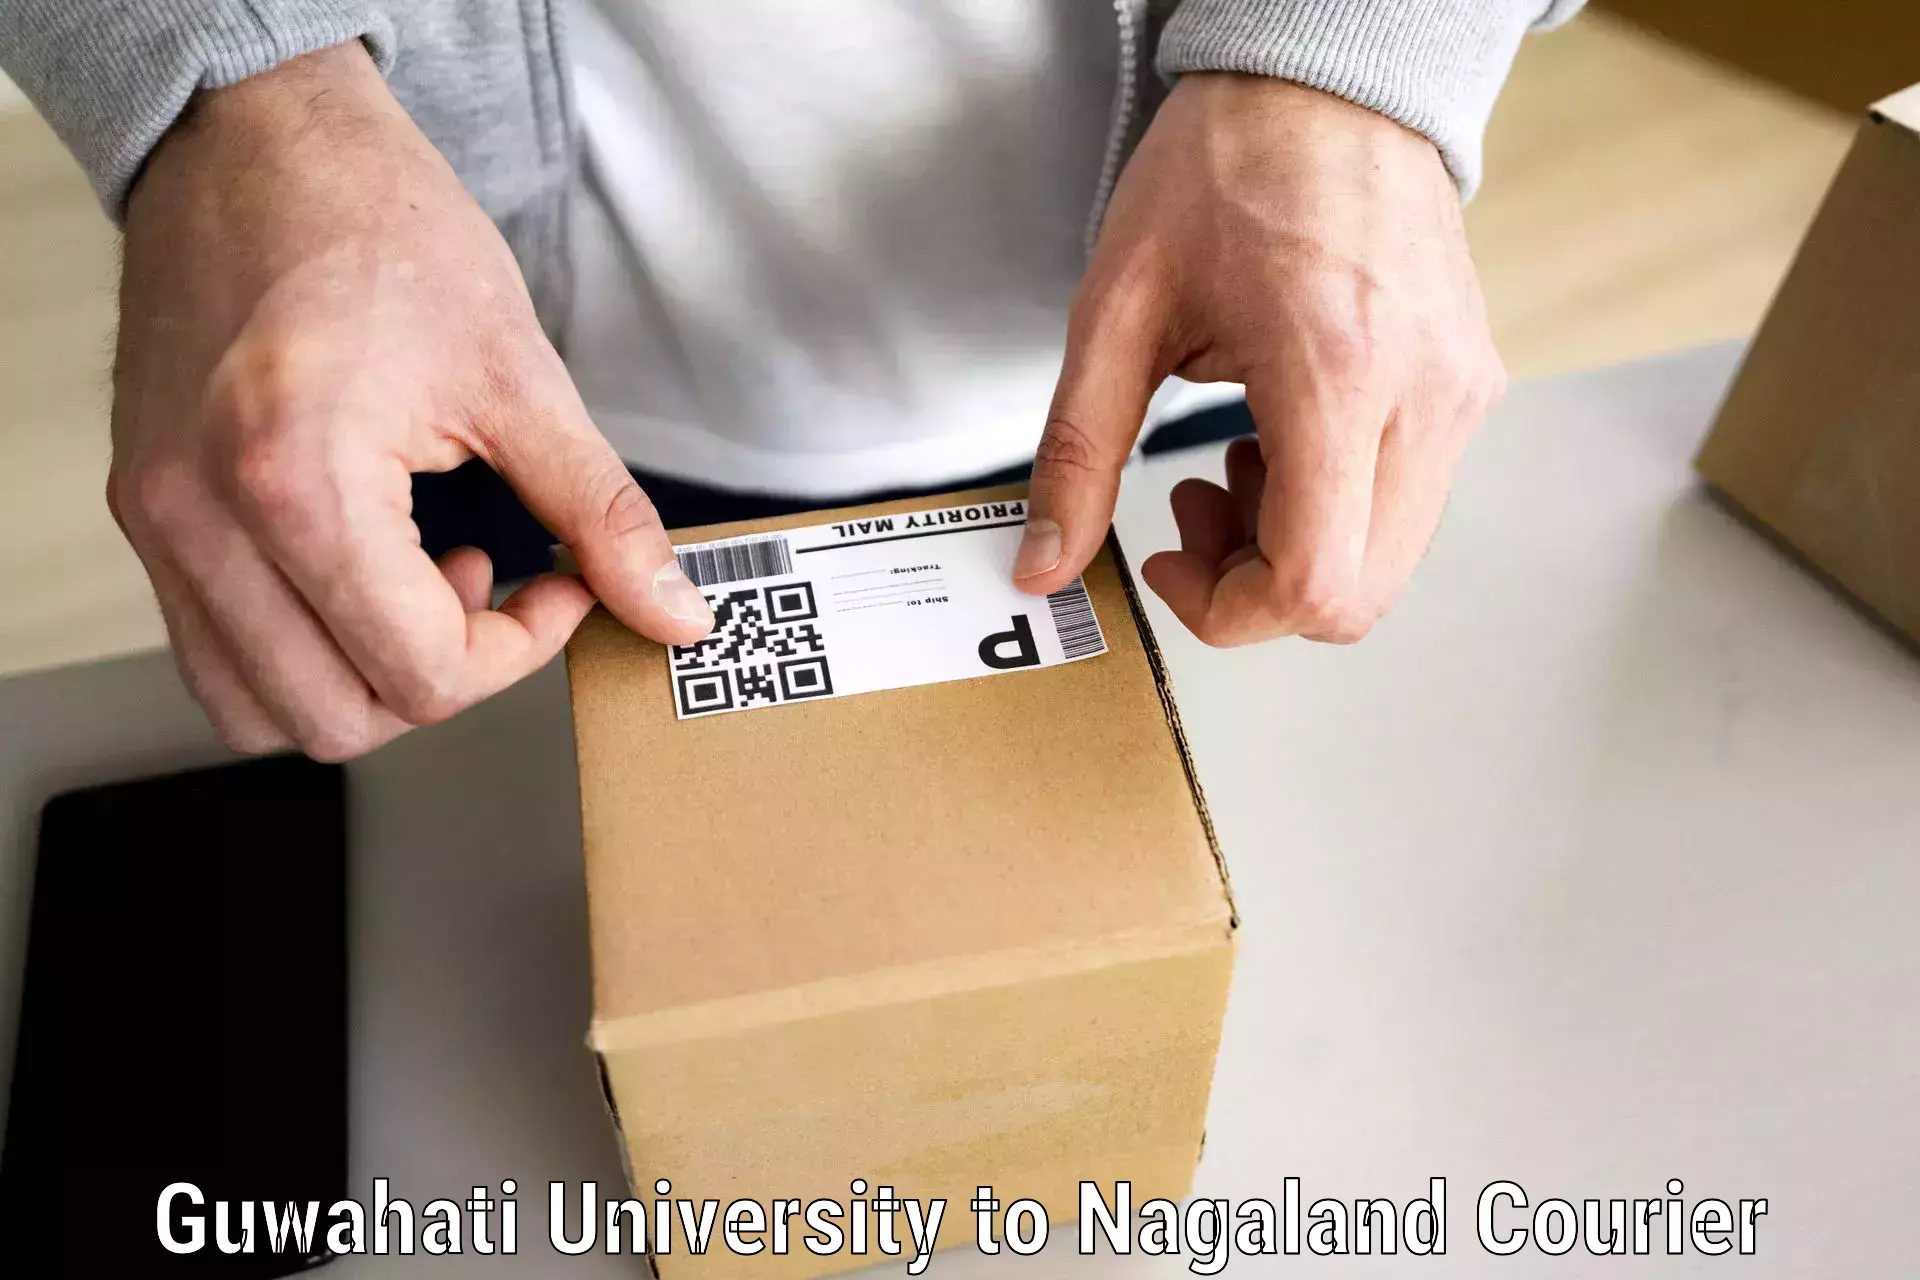 Household logistics services in Guwahati University to NIT Nagaland